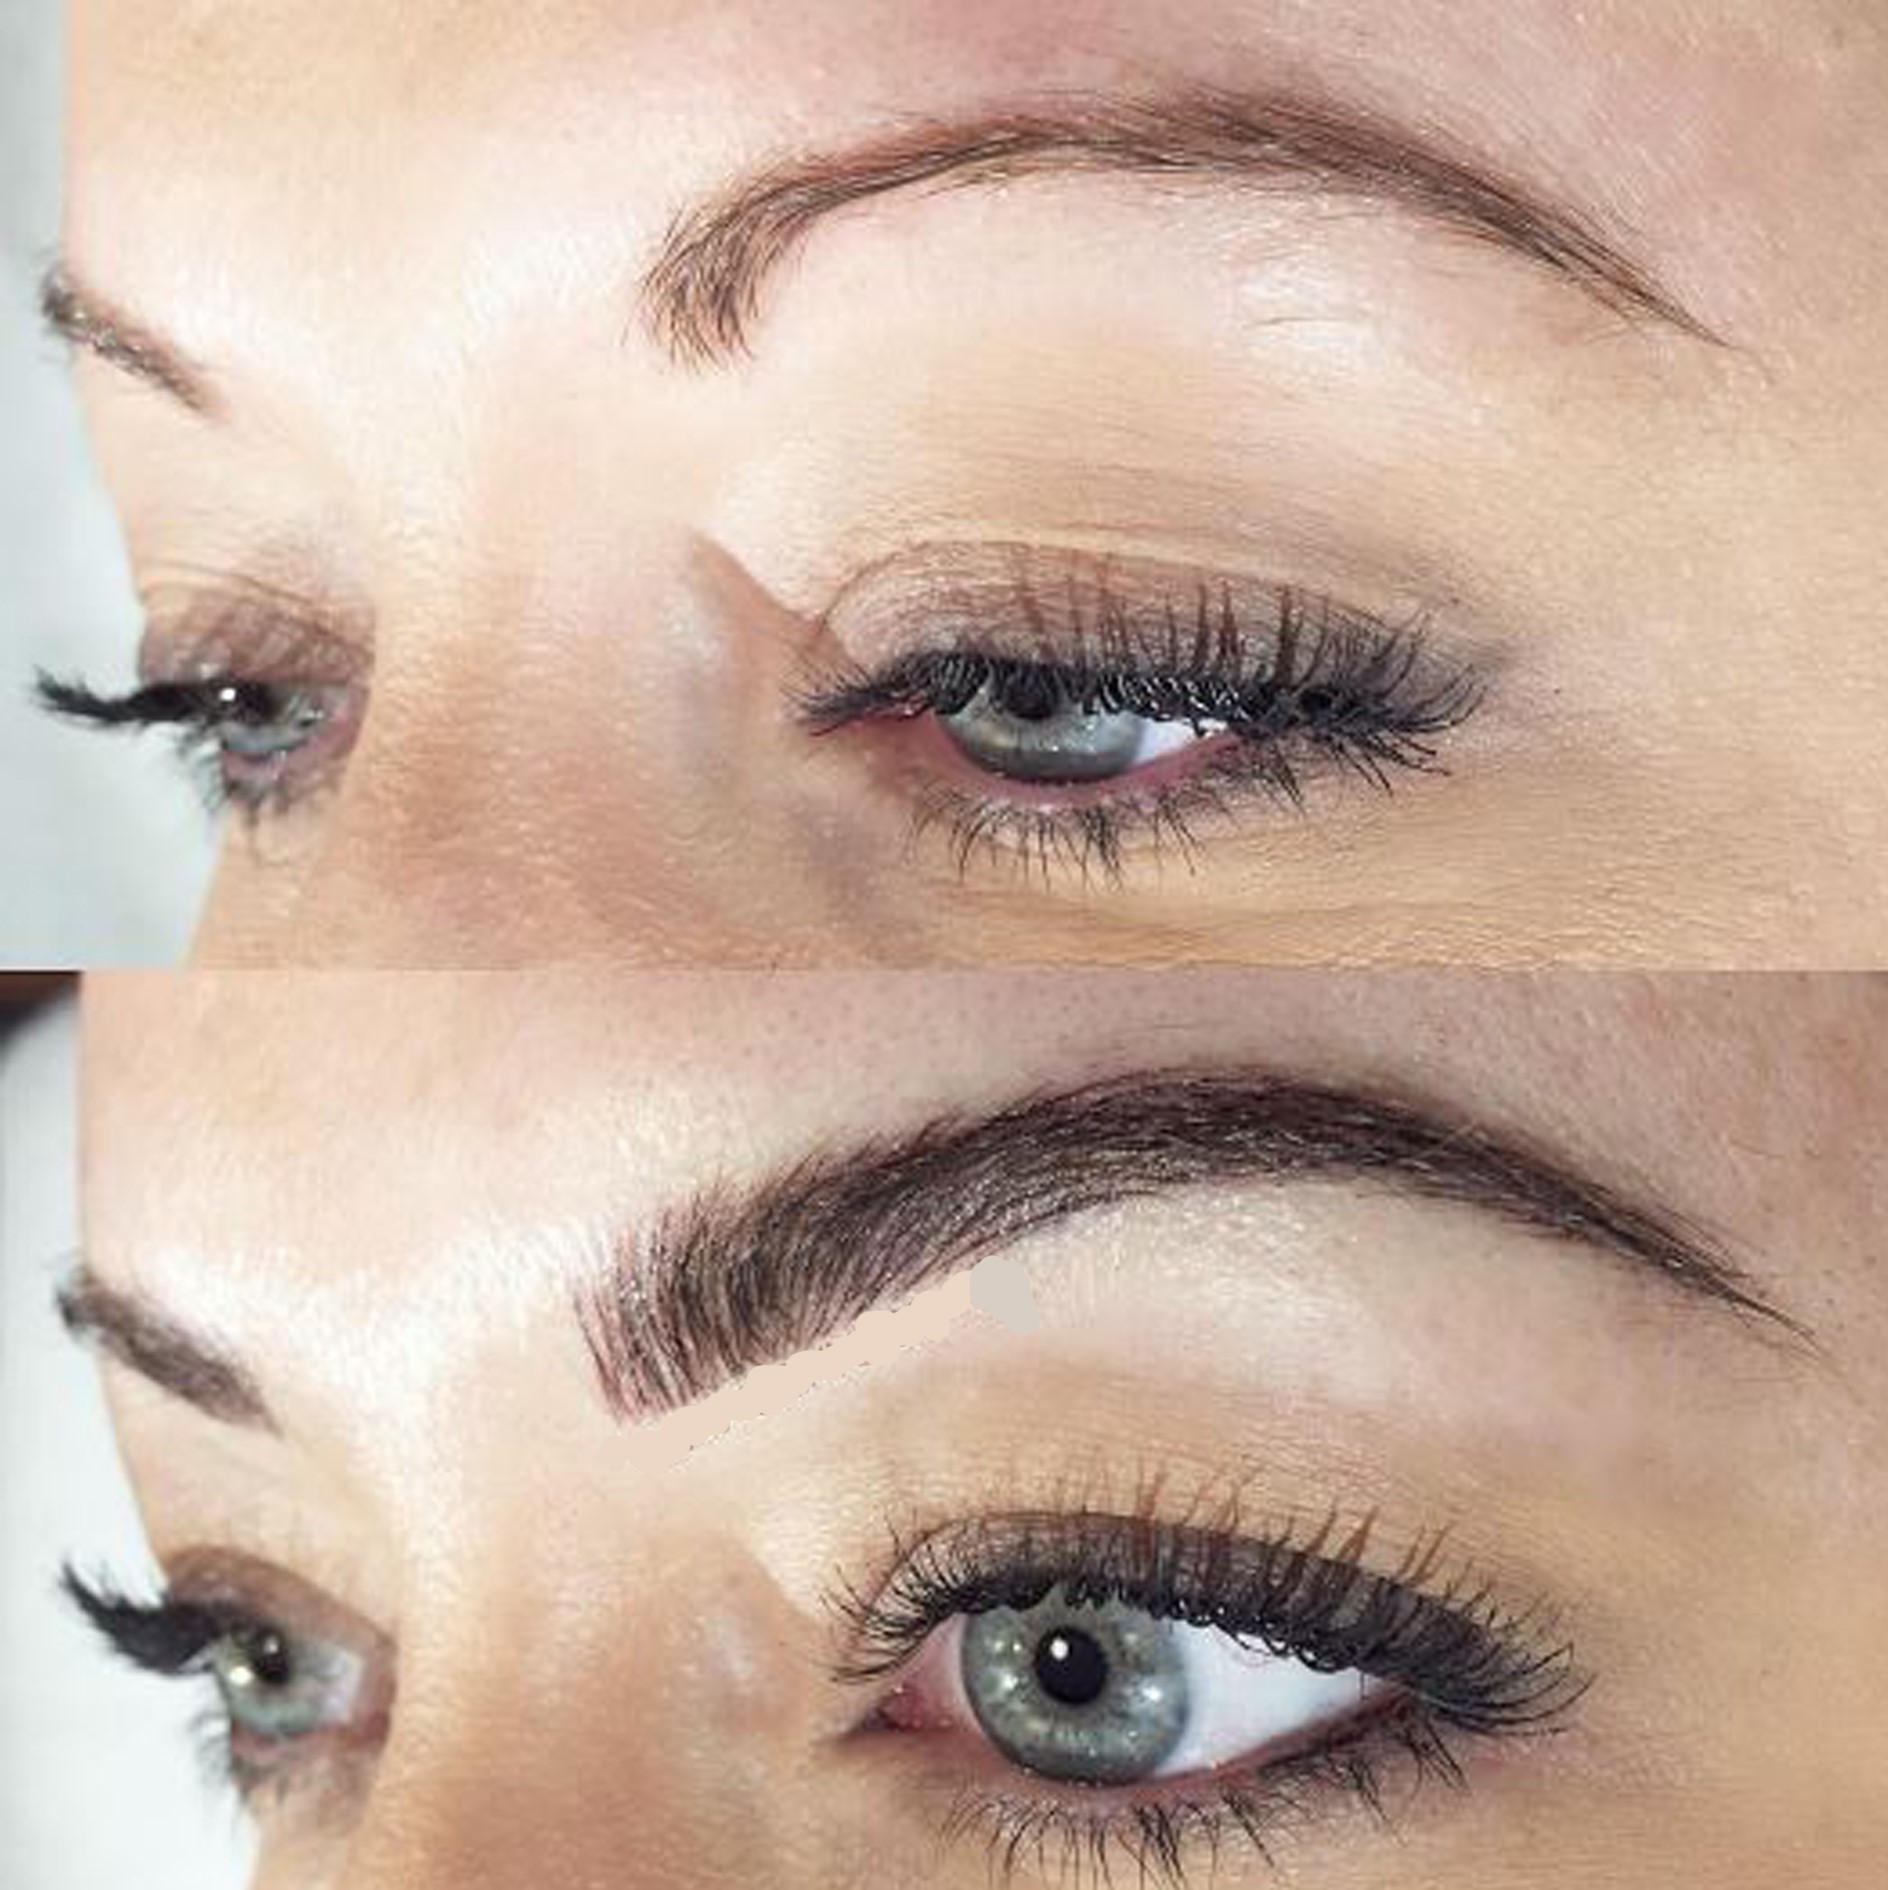 Traditional Tattoo vs Microblading vs Ombré Powder Brows  Stay Tint  Artistry  Academy  NYC